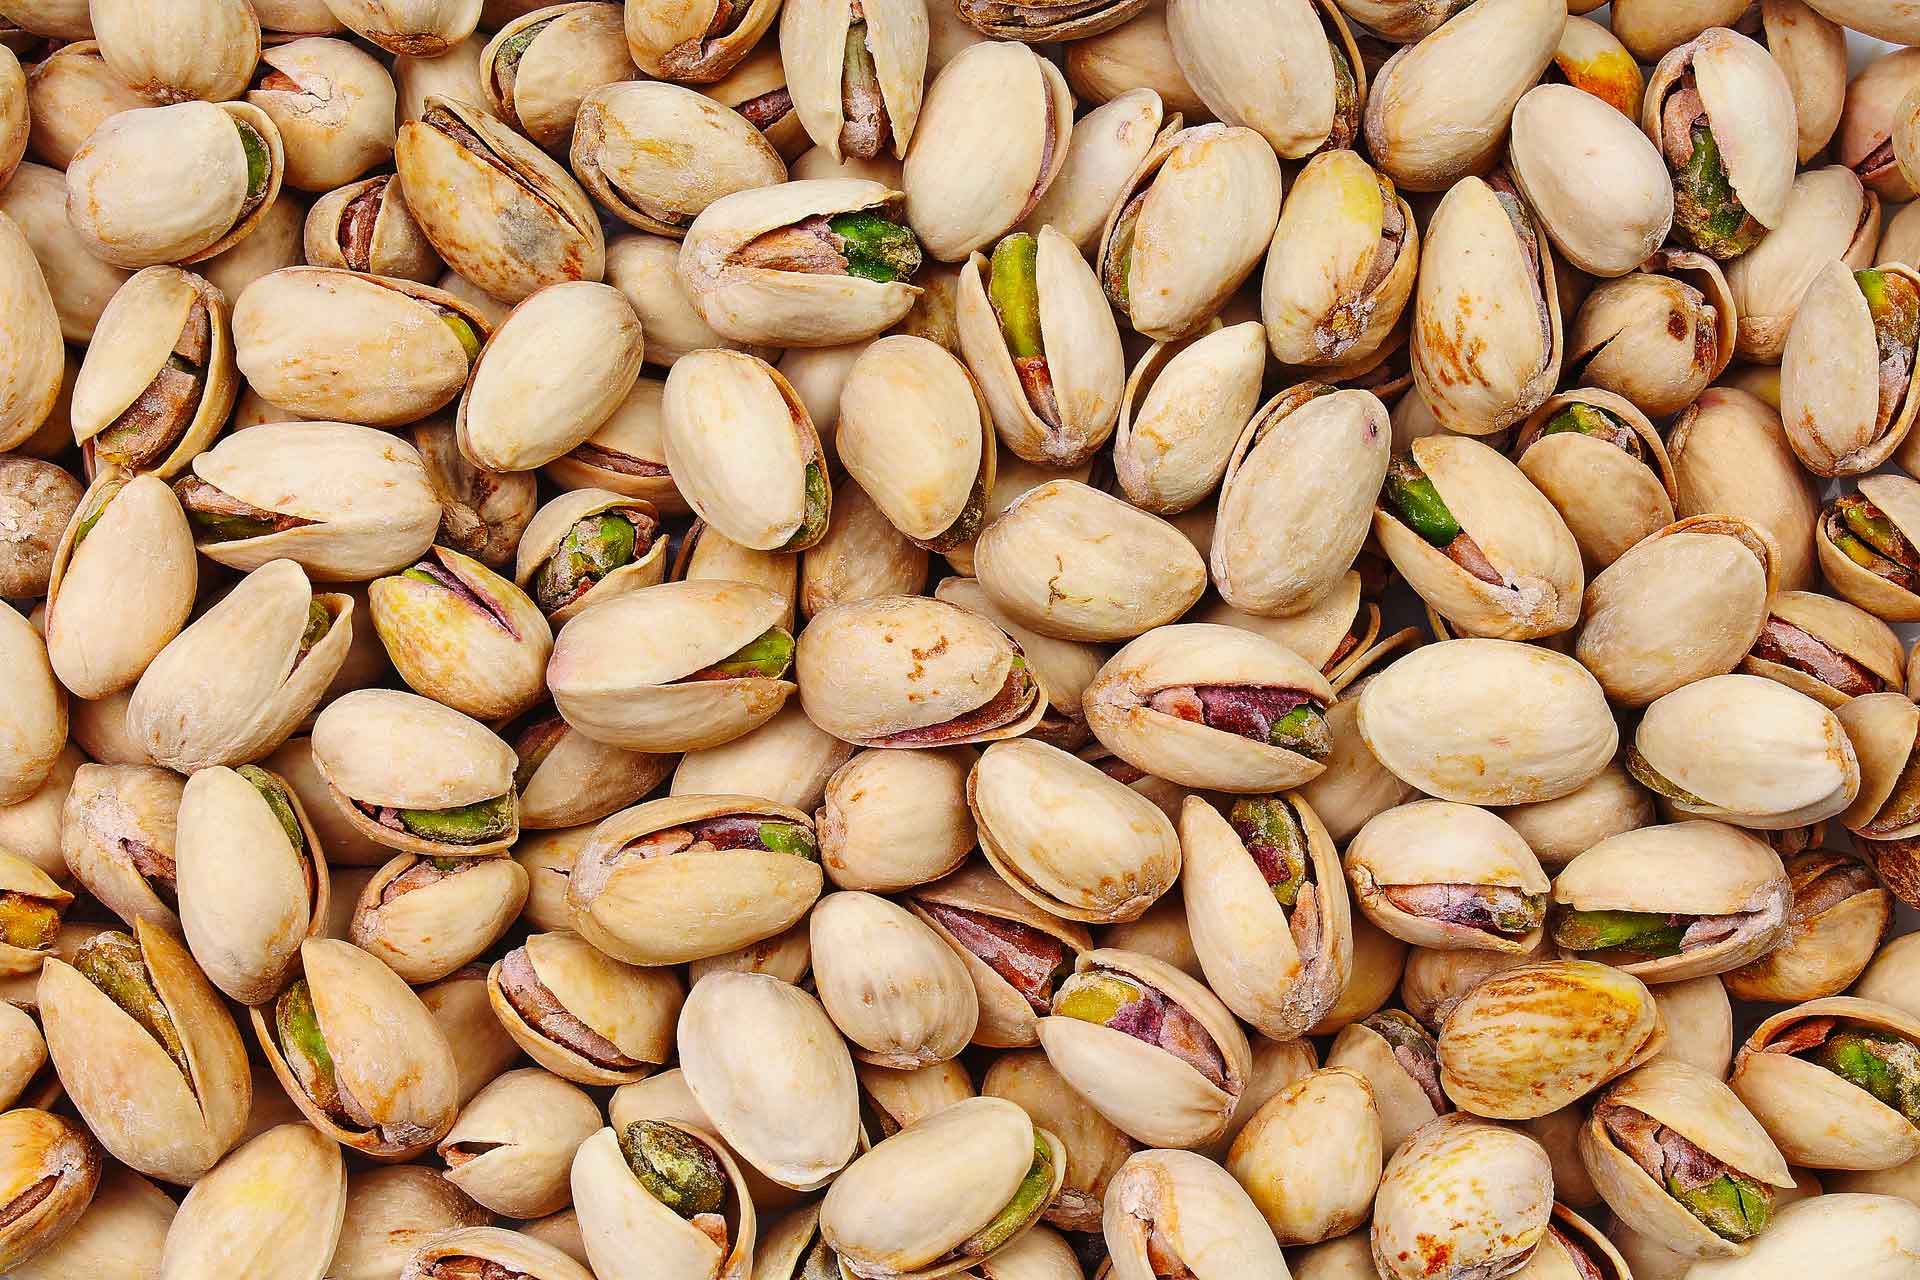 The purchase price of pistachio kernels Woolworths + properties, disadvantages and advantages